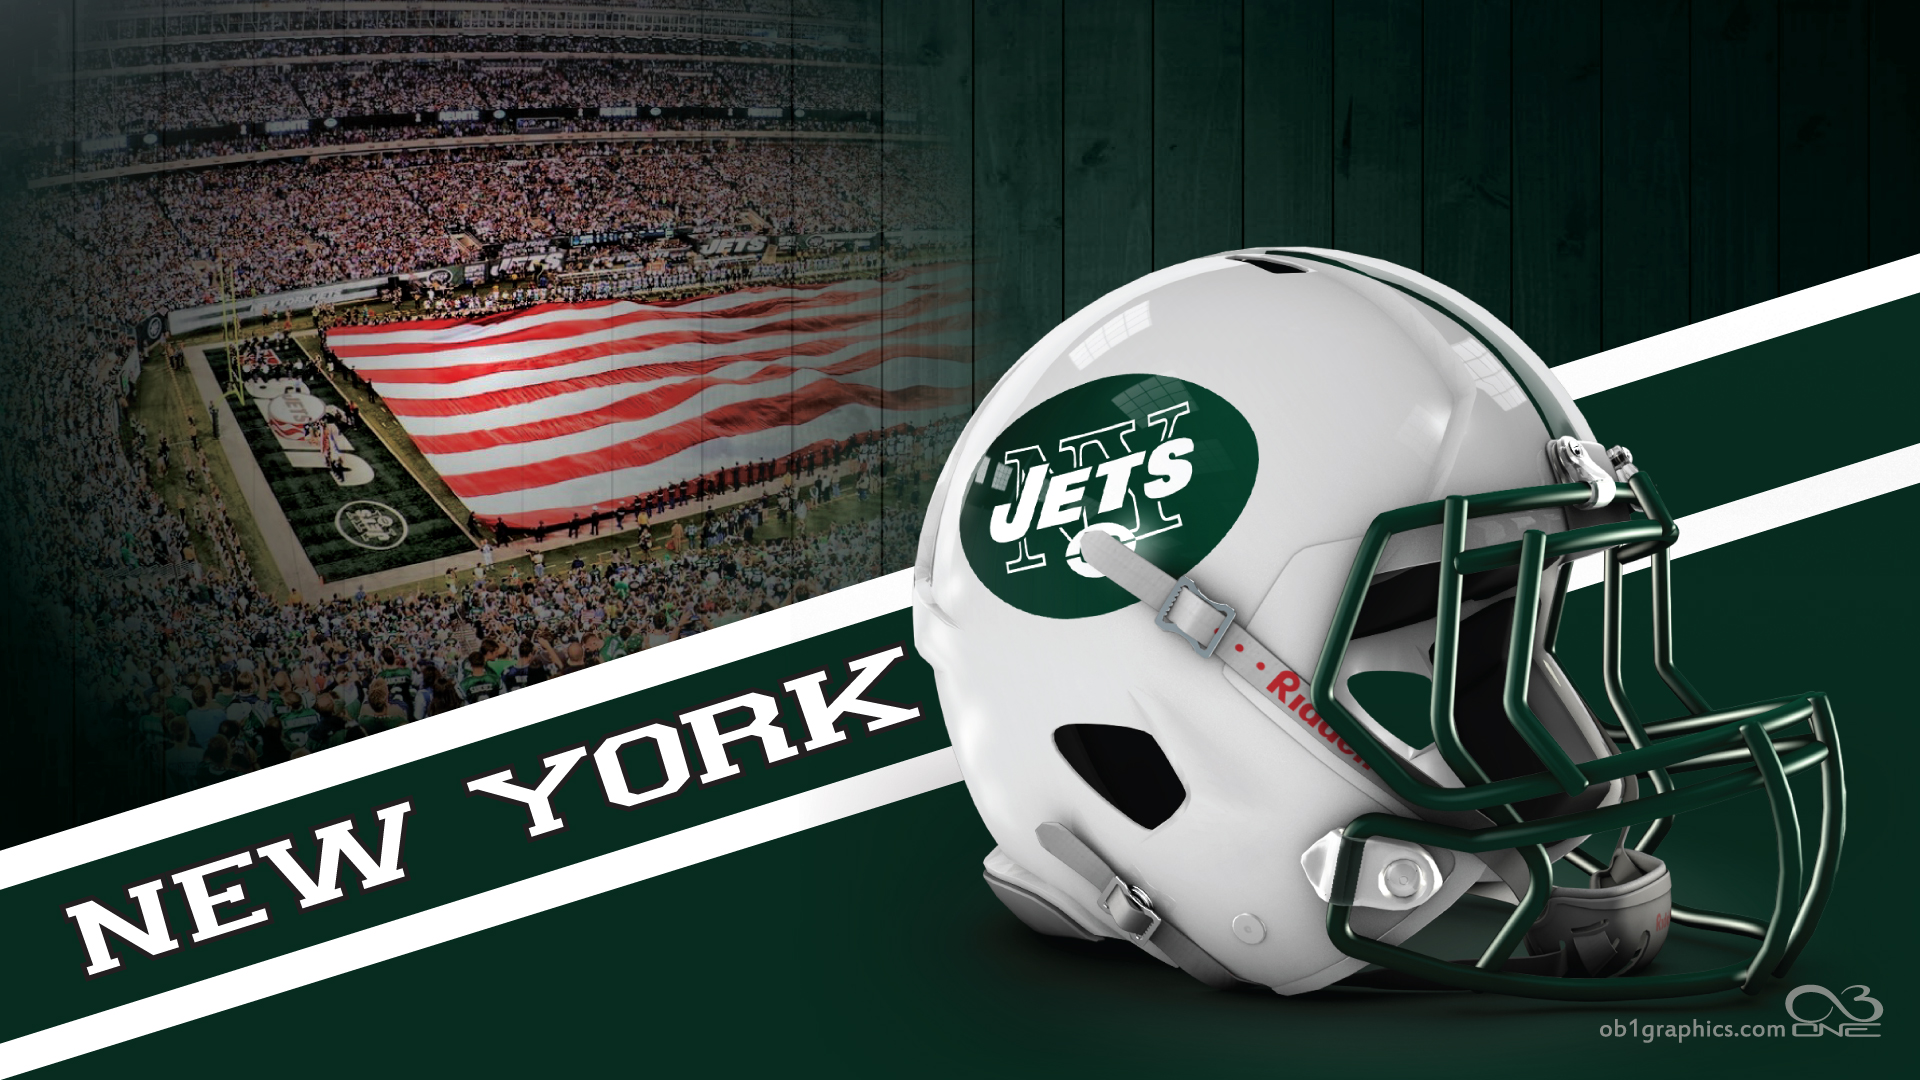  this new New York Jets desktop background New York Jets wallpapers